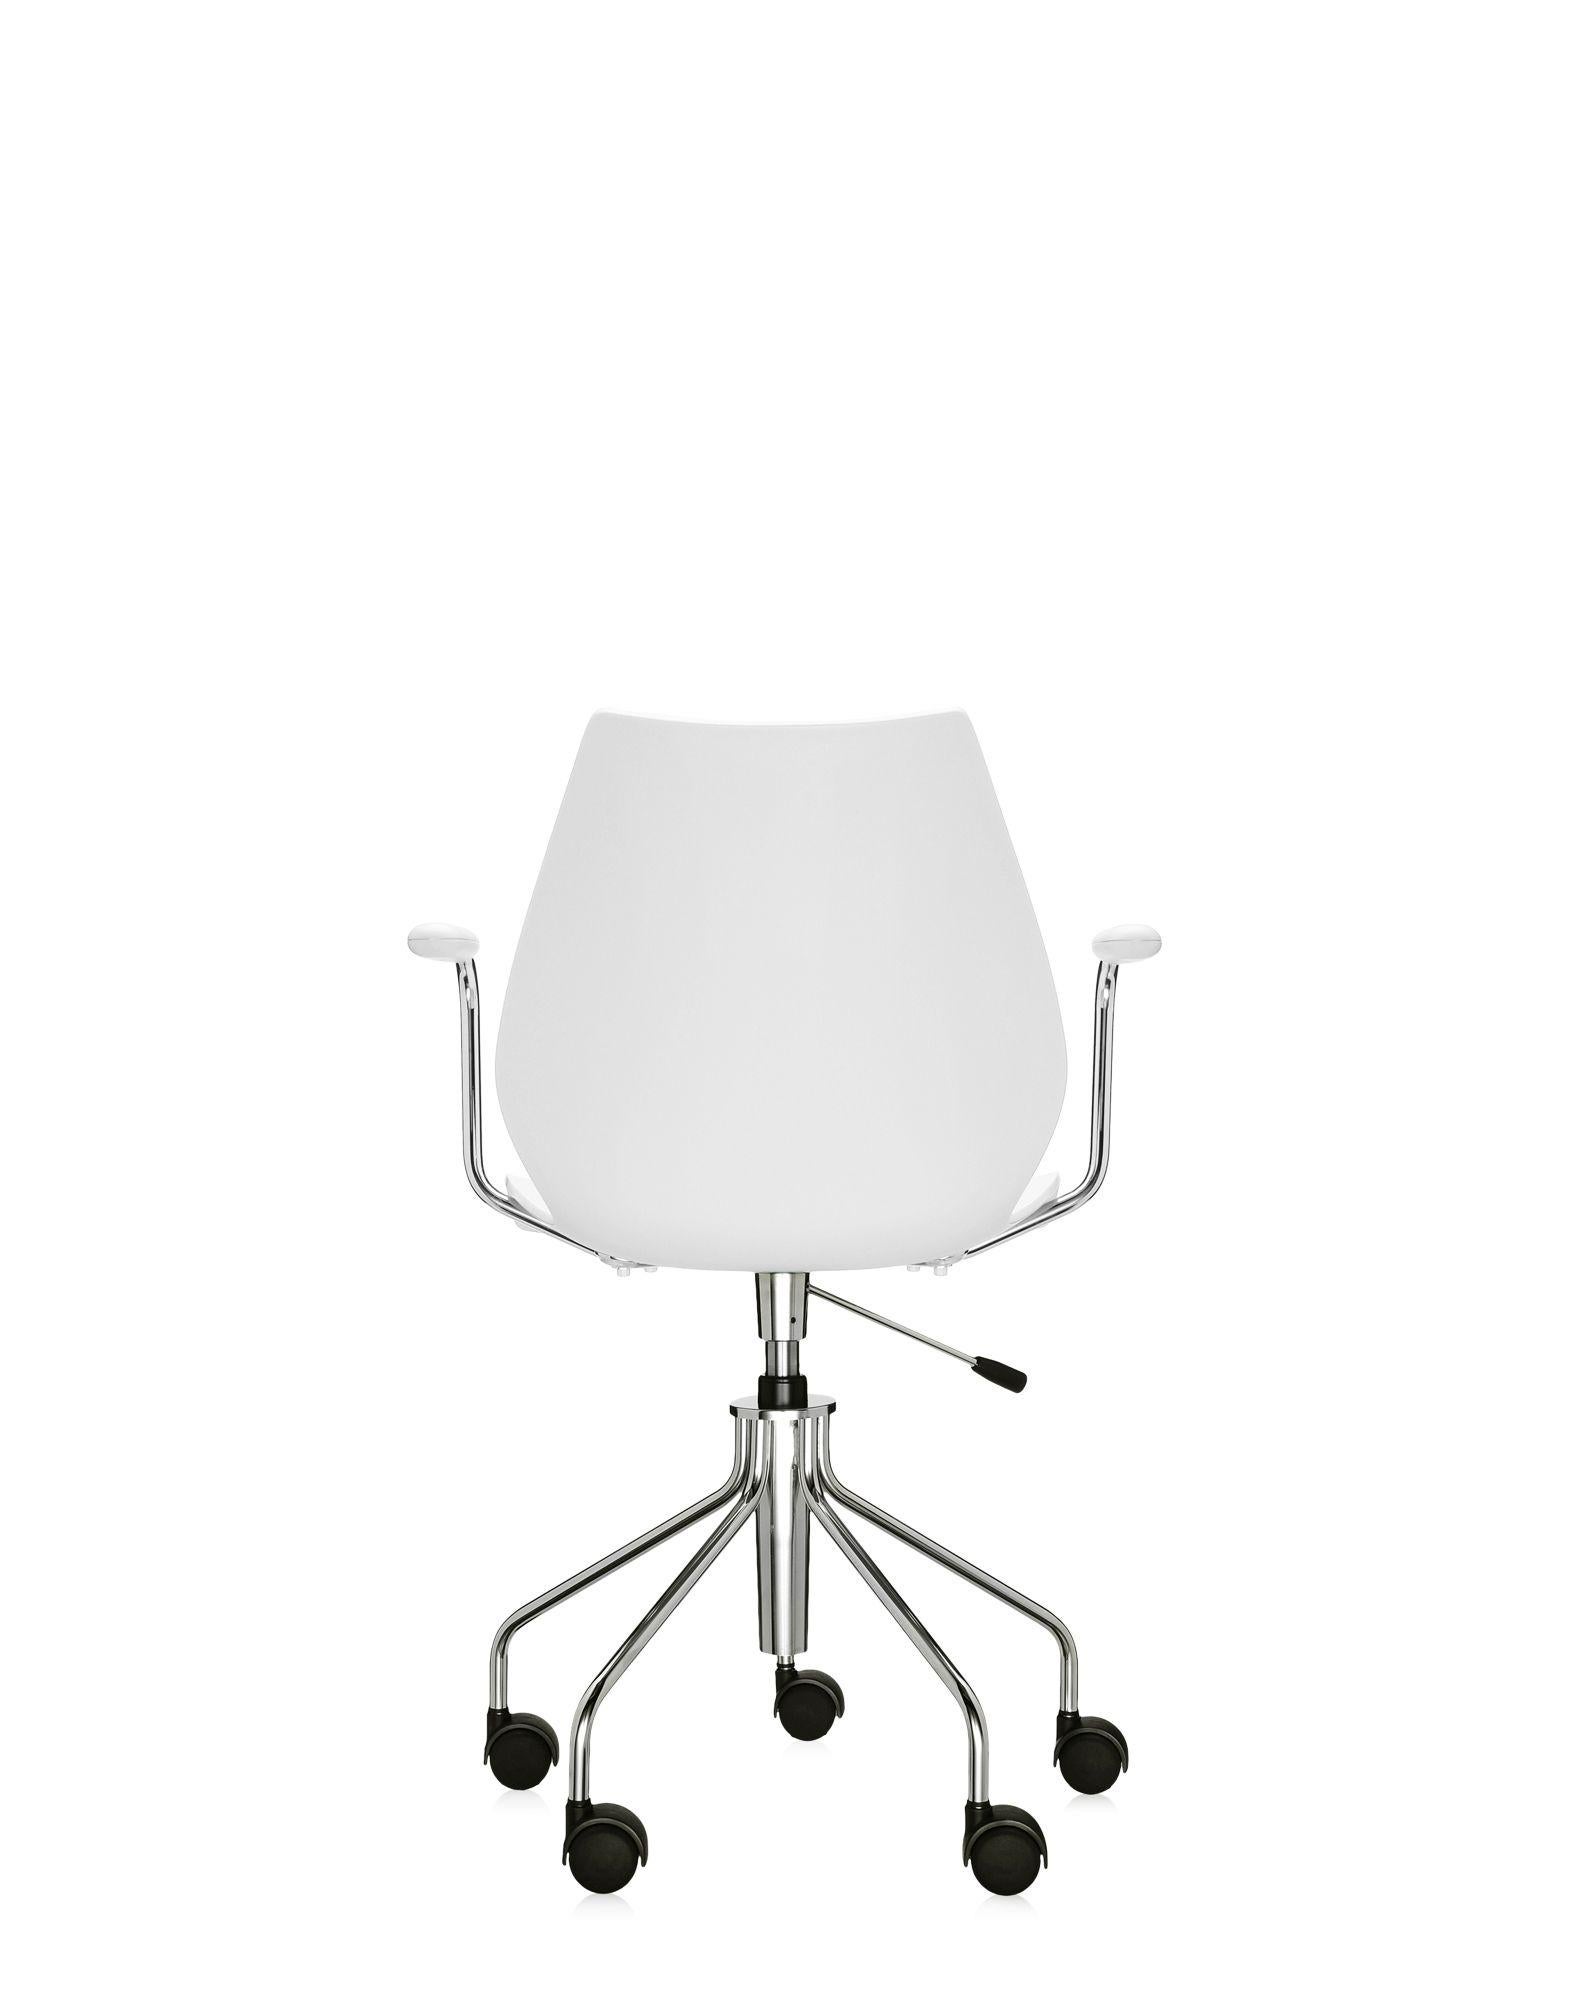 Modern Kartell Maui Swivel Chair Adjustable in Zinc White by Vico Magistretti